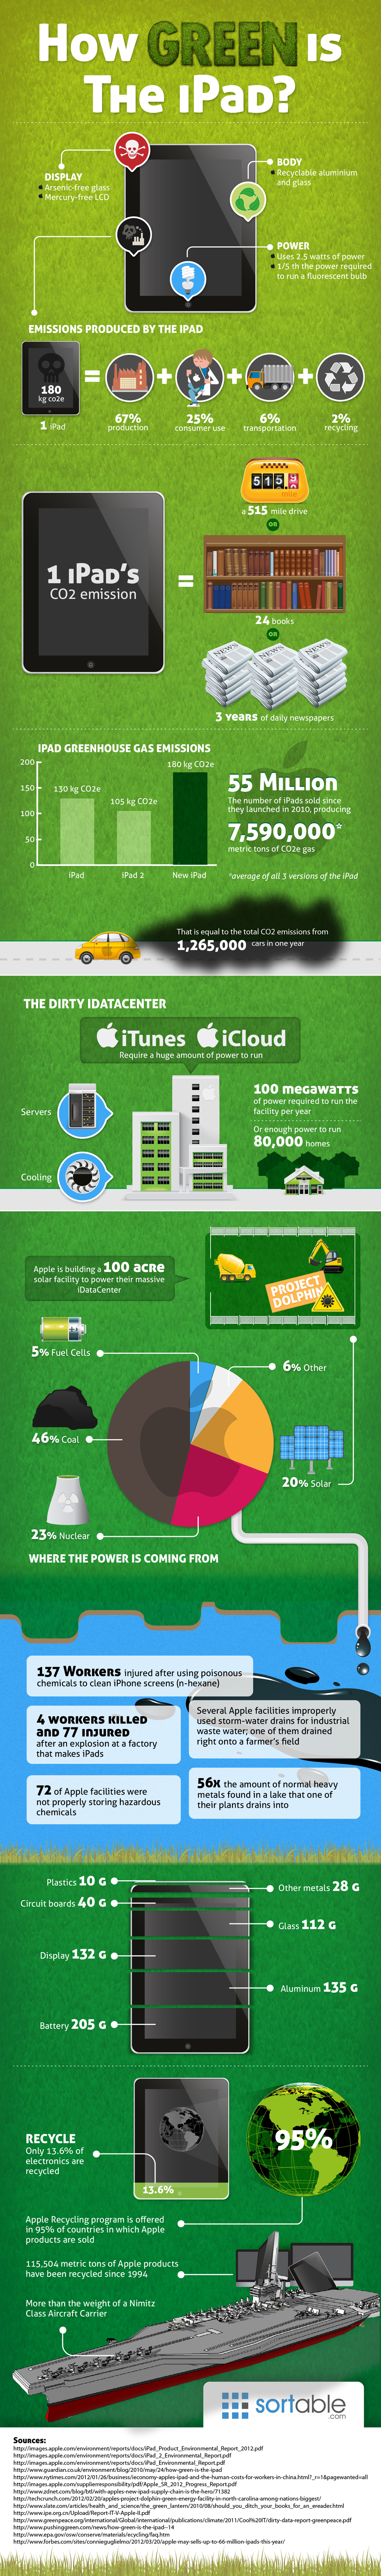 How Green Is Your iPad? [INFOGRAPHIC]